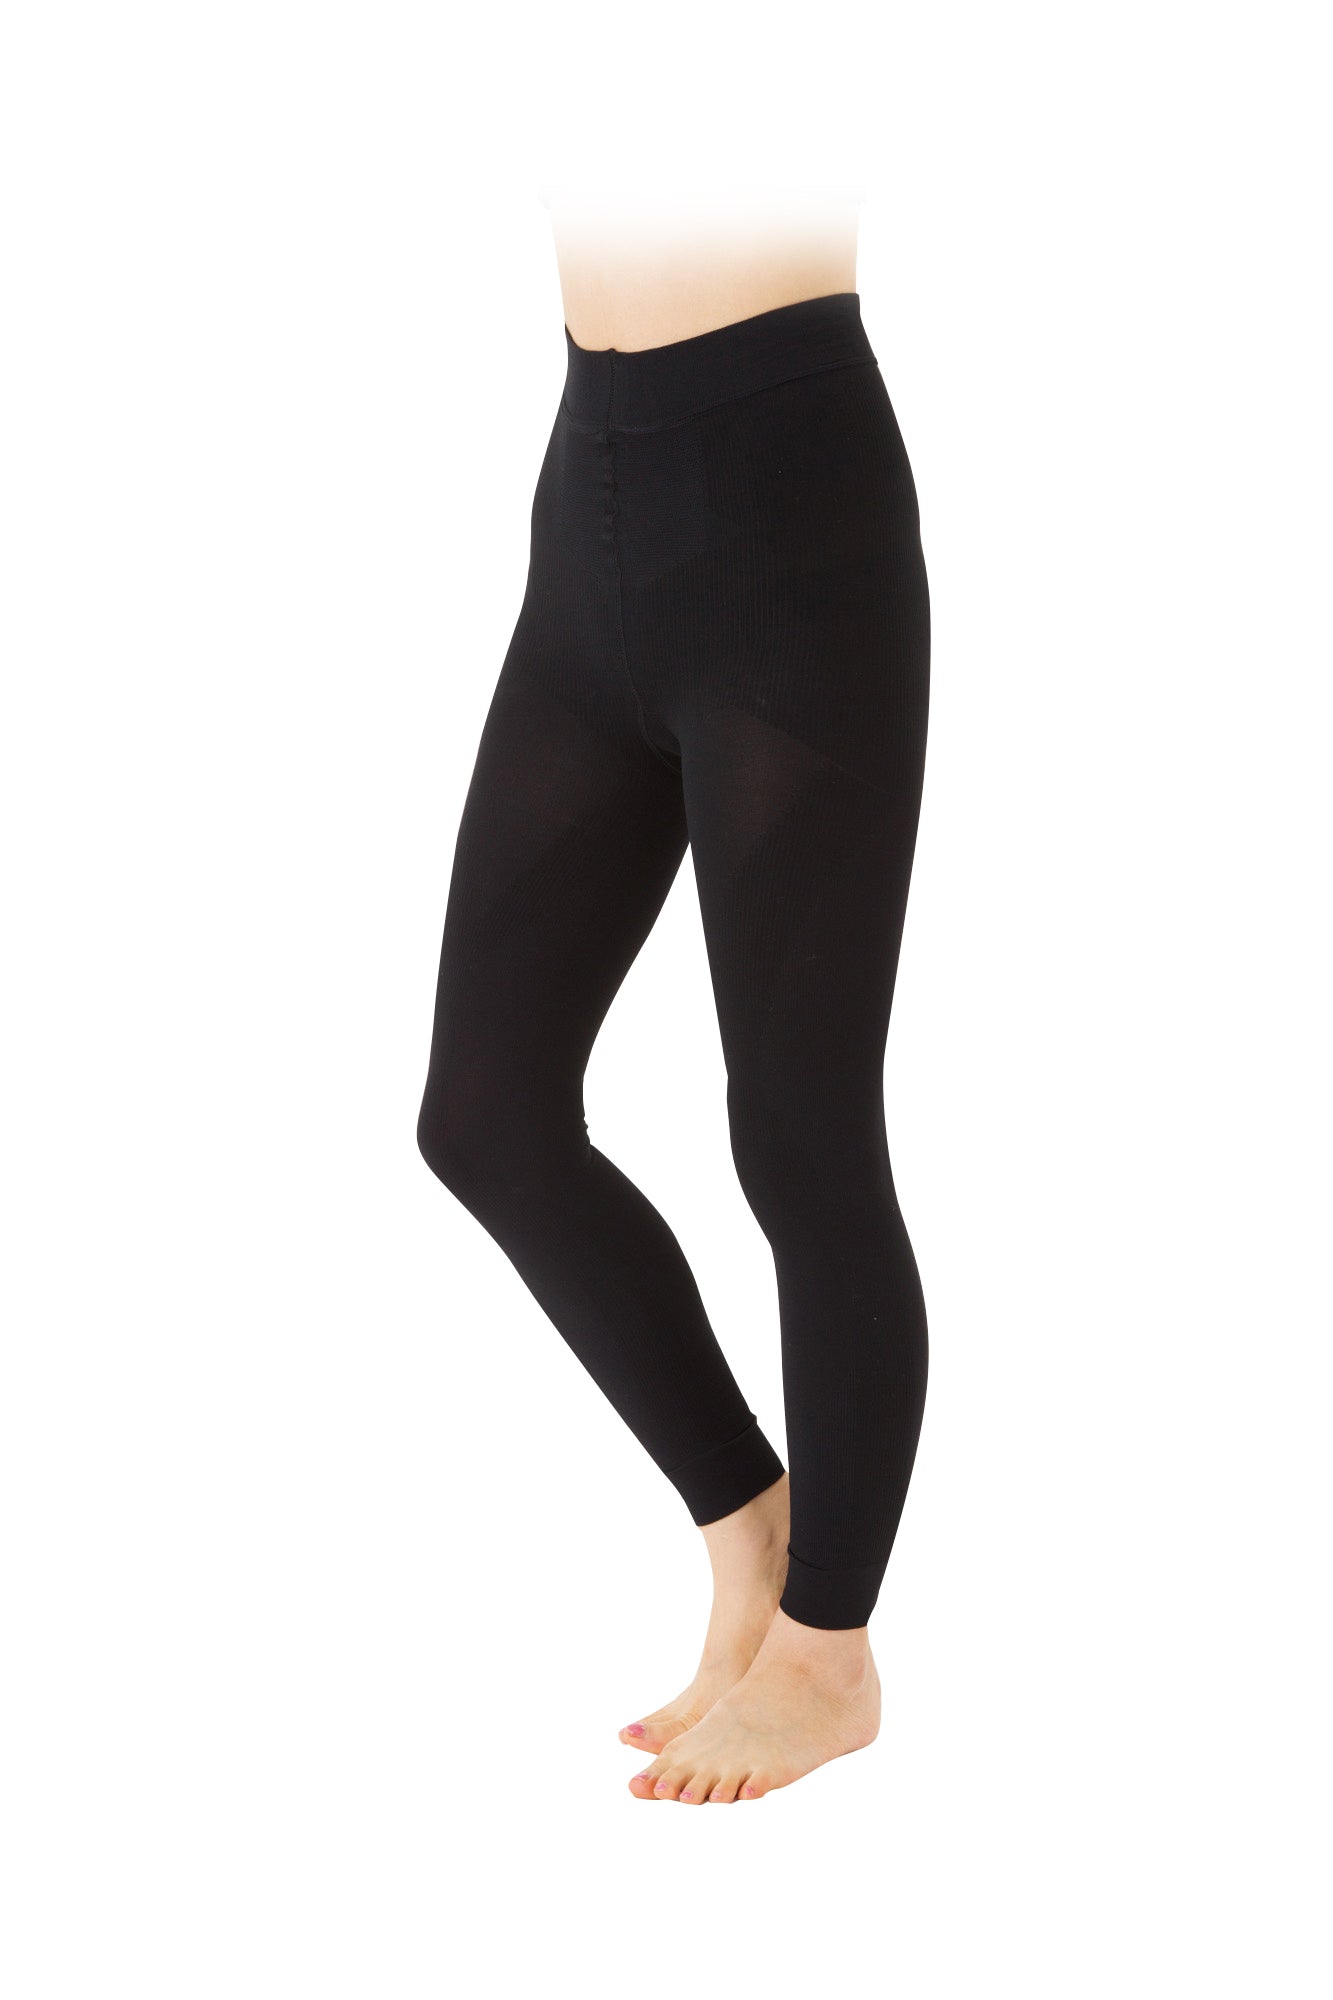 Buy Black 60 Denier Compression Tights from the Next UK online shop